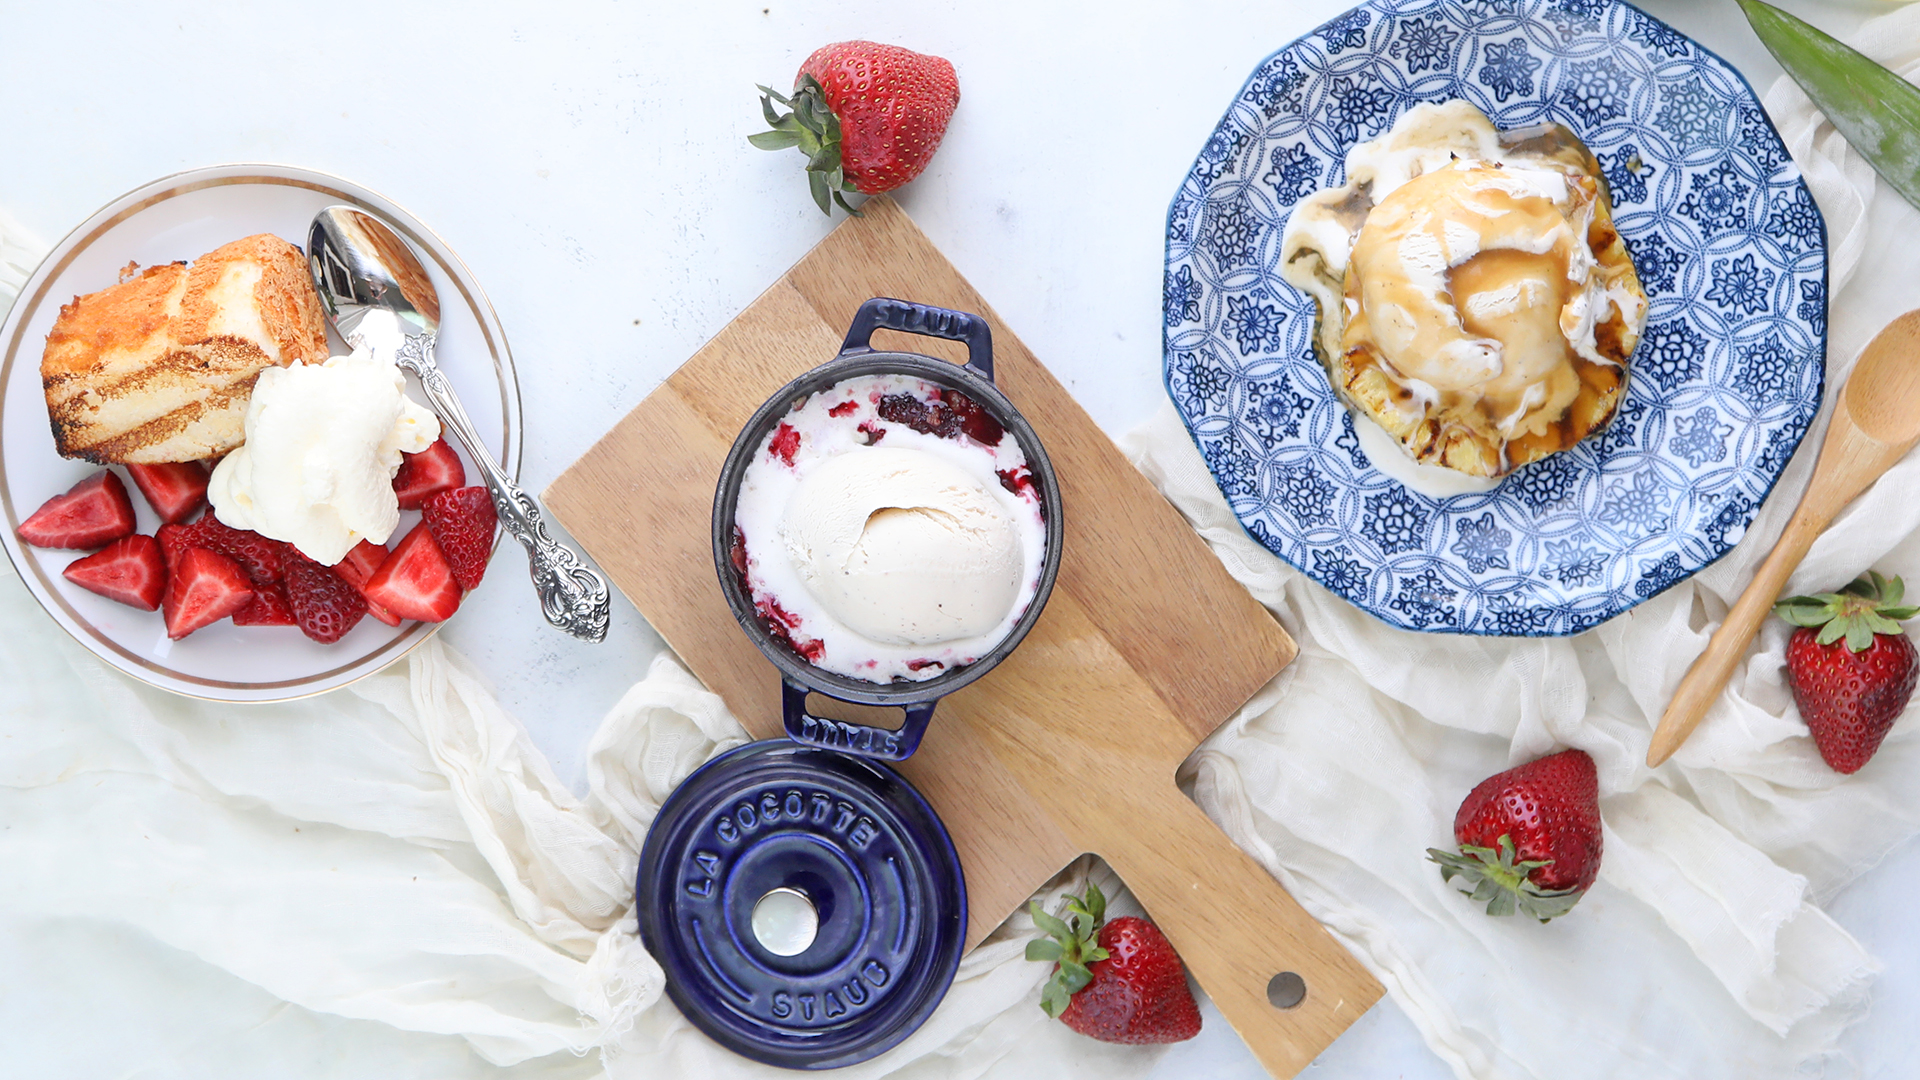 3 Easy Grilled Desserts You Need to Make This Weekend